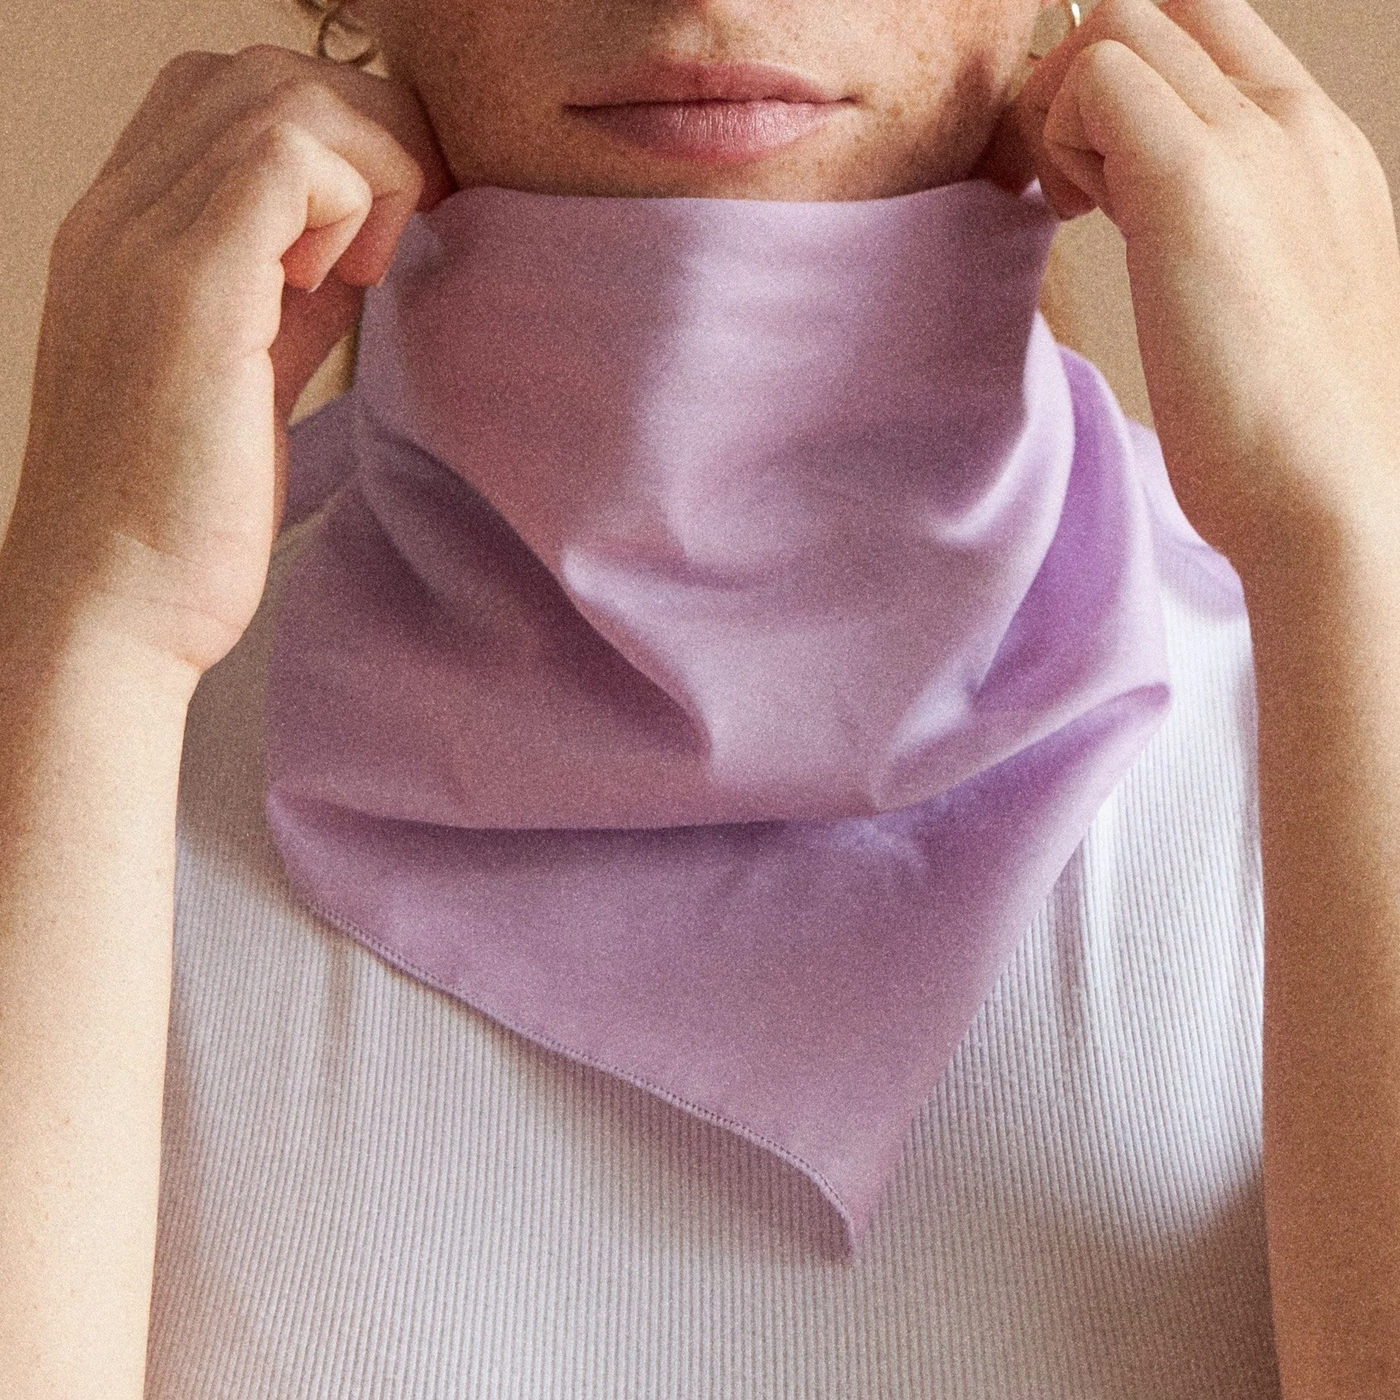 Gotstyle Fashion - Lover's Tempo Scarves Lana Cotton Scarf - Lilac